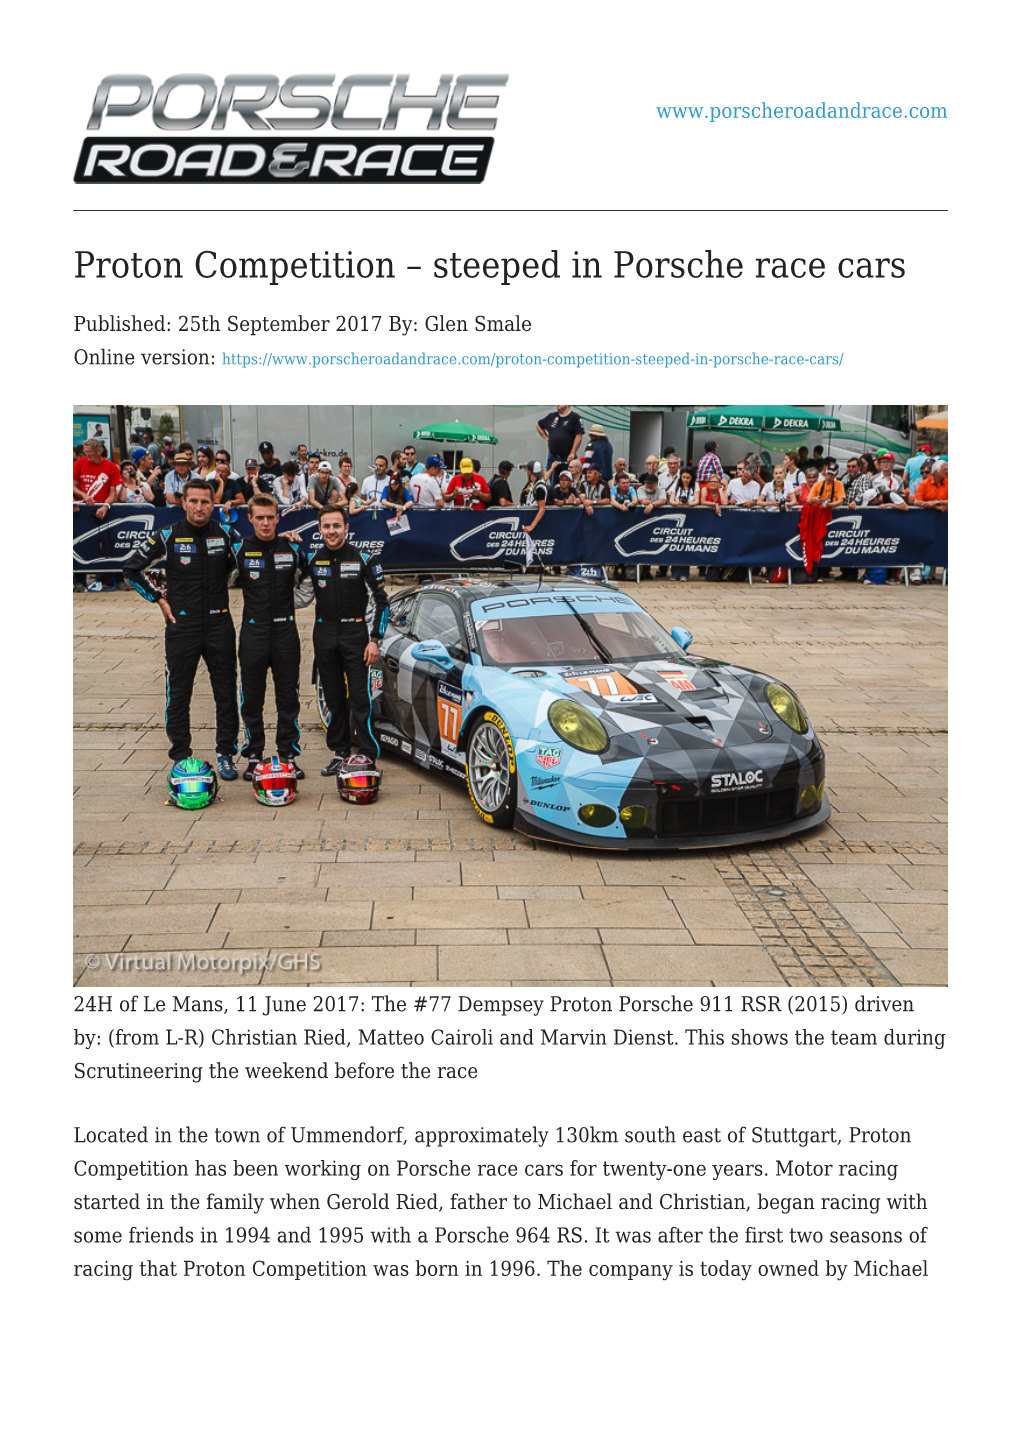 Proton Competition – Steeped in Porsche Race Cars